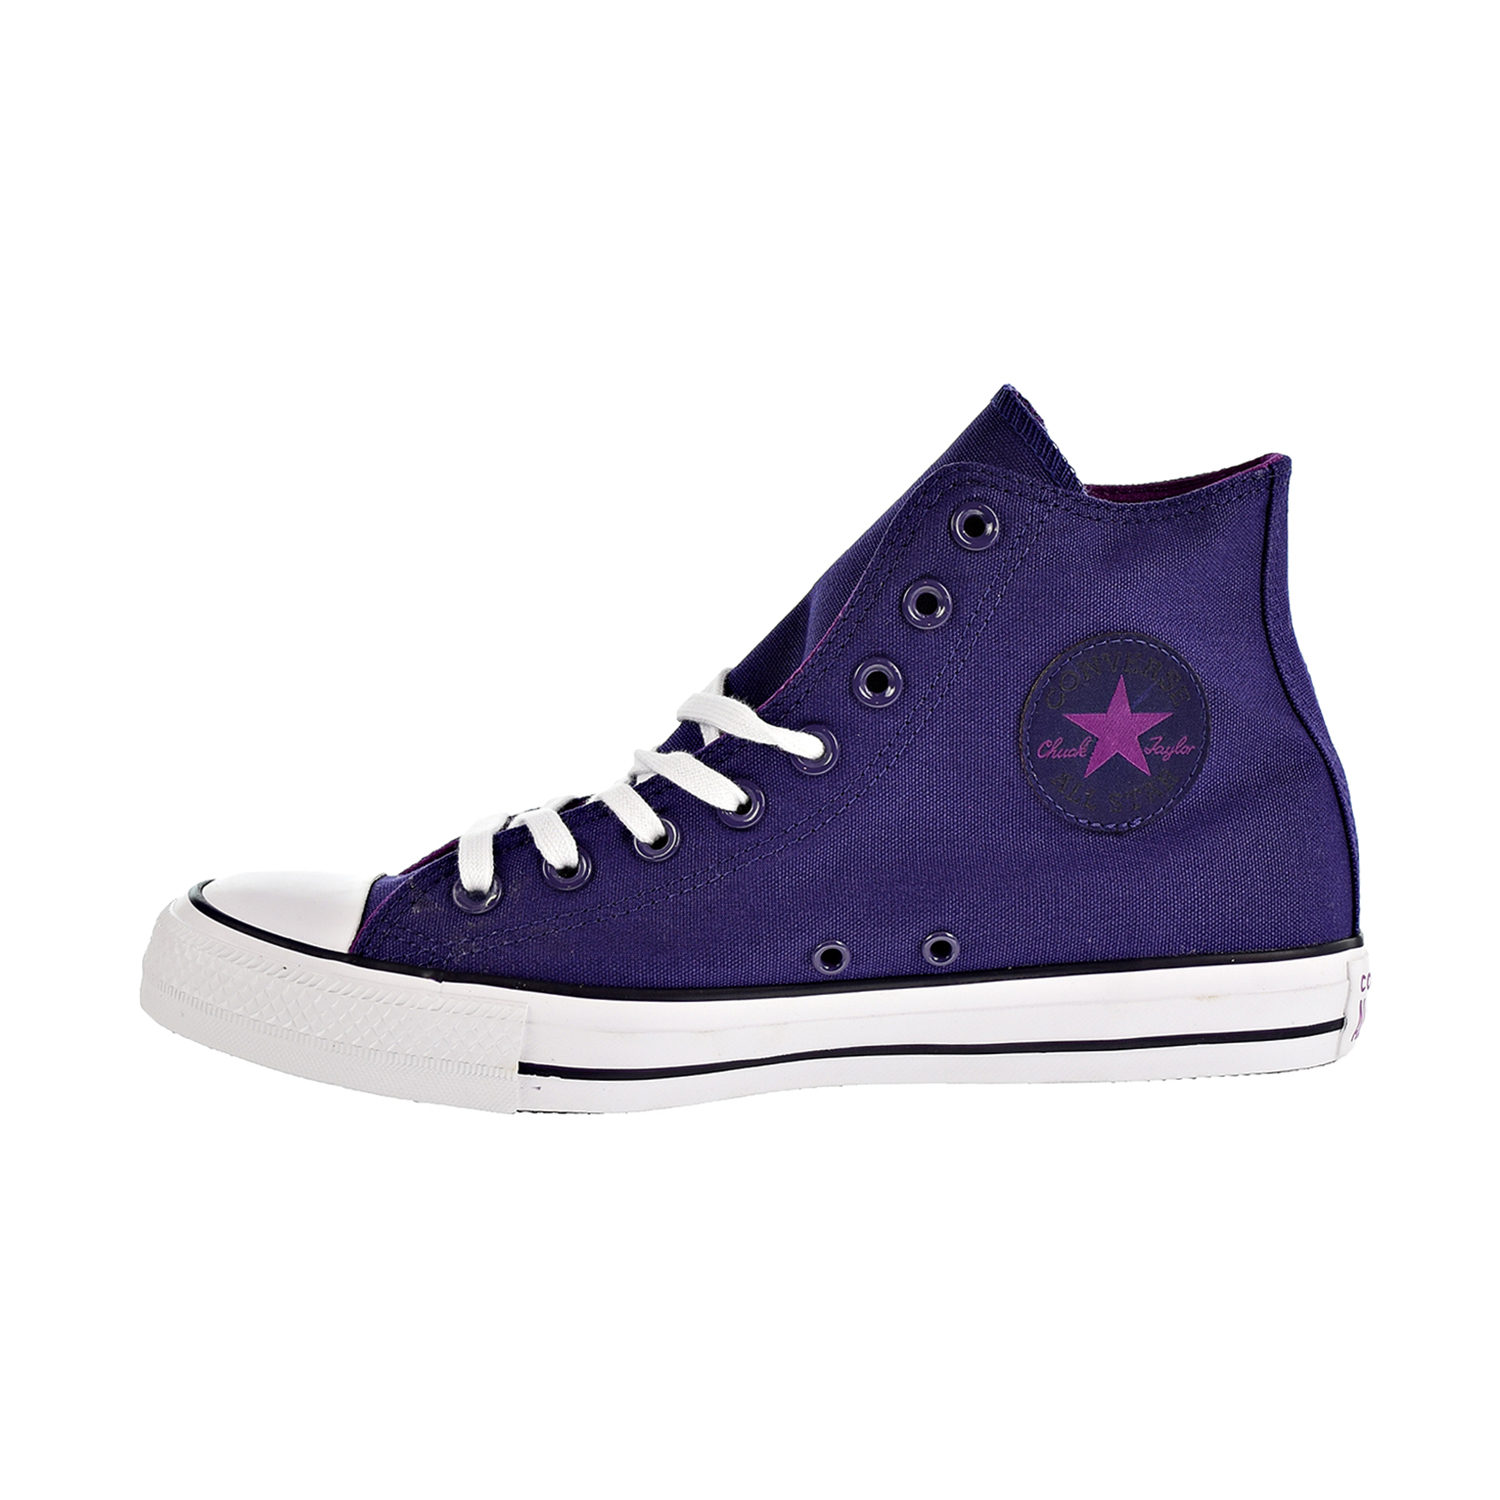 Converse Chuck Taylor All Star Seasonal Color Hi Unisex/Men's Shoes New Orchid 162450f - image 4 of 6